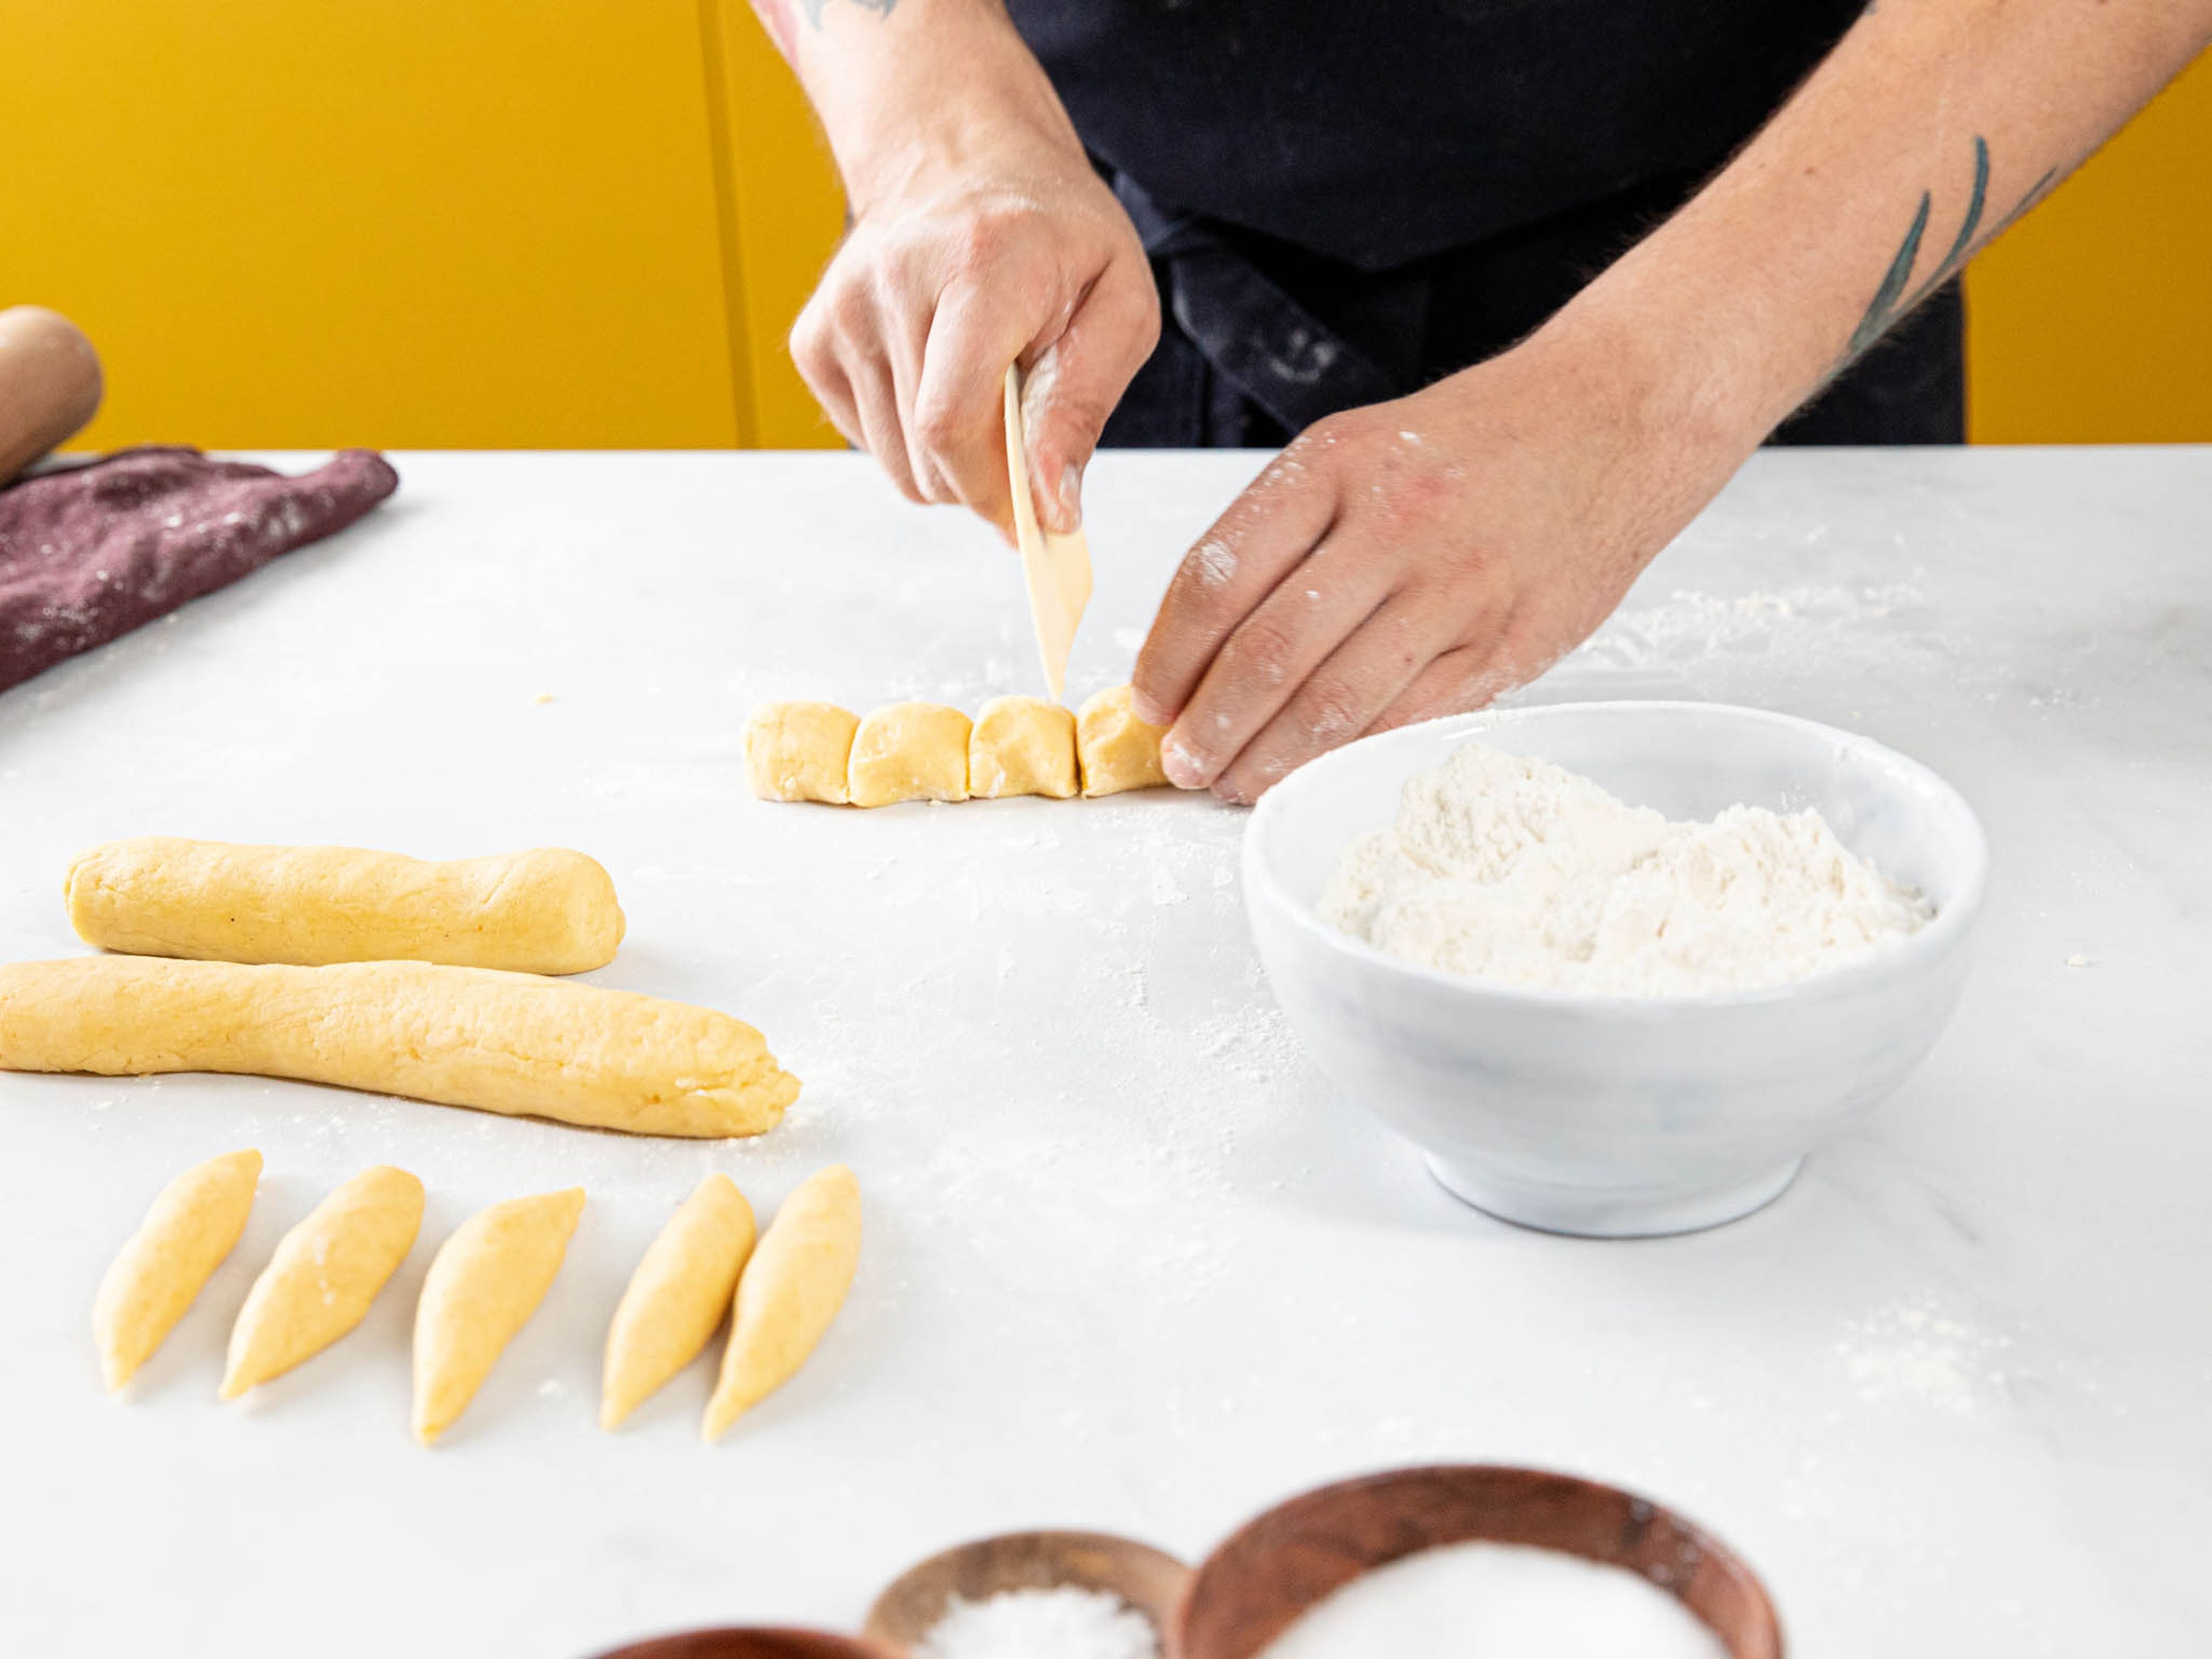 Divide the dough into 4 and roll into strips approx 4-cm./1-in. thick, then cut into evenly sized pieces, measuring approx. the same width-wise. Roll each into dumplings with pointed ends, measuring approx. 2-cm./3/4-in. wide.